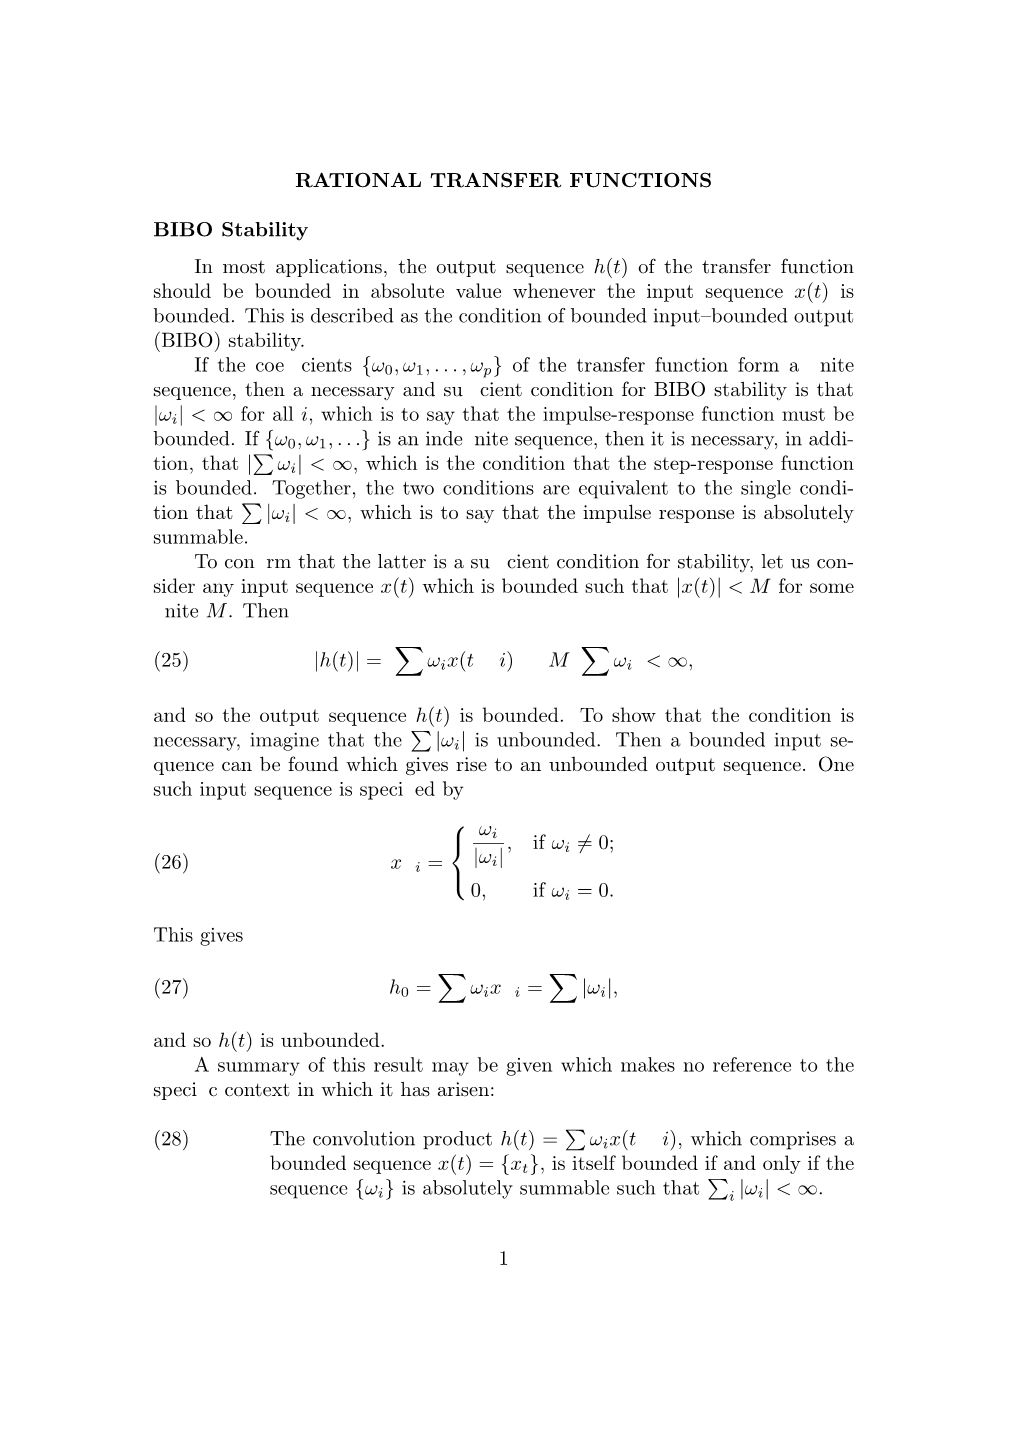 RATIONAL TRANSFER FUNCTIONS BIBO Stability in Most Applications